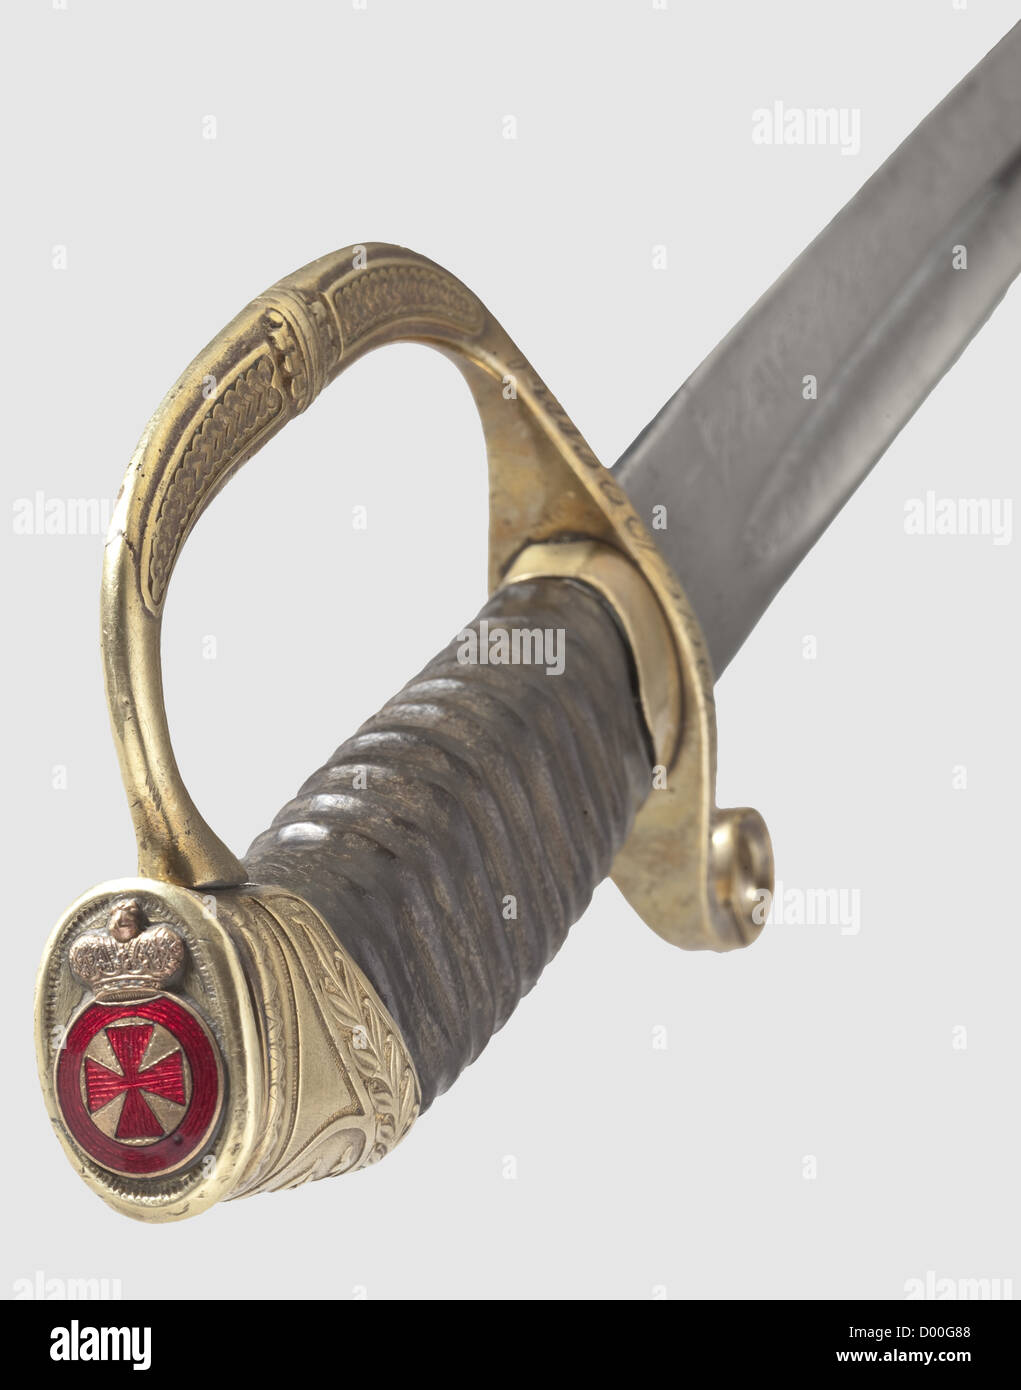 A model 1909 officer's shashqa with applied Order of Saint Anne,awarded for Bravery. Single-edged blade(shortened)with fullers on both sides and later nickel-plating. The ricasso bears the maker's mark 'F. Fichte,Solingen' . The Cyrillic inscription 'For Bravery' is engraved on both sides of the knuckle-bow. Brass hilt bearing the cipher 'N II' and applied enamelled Order of St. Anne. Replacement wooden grip and leather-covered wooden scabbard with brass mountings. Length 84 cm,historic,historical,1900s,20th century,thrusting,thrustings,blade,blades,Additional-Rights-Clearences-Not Available Stock Photo